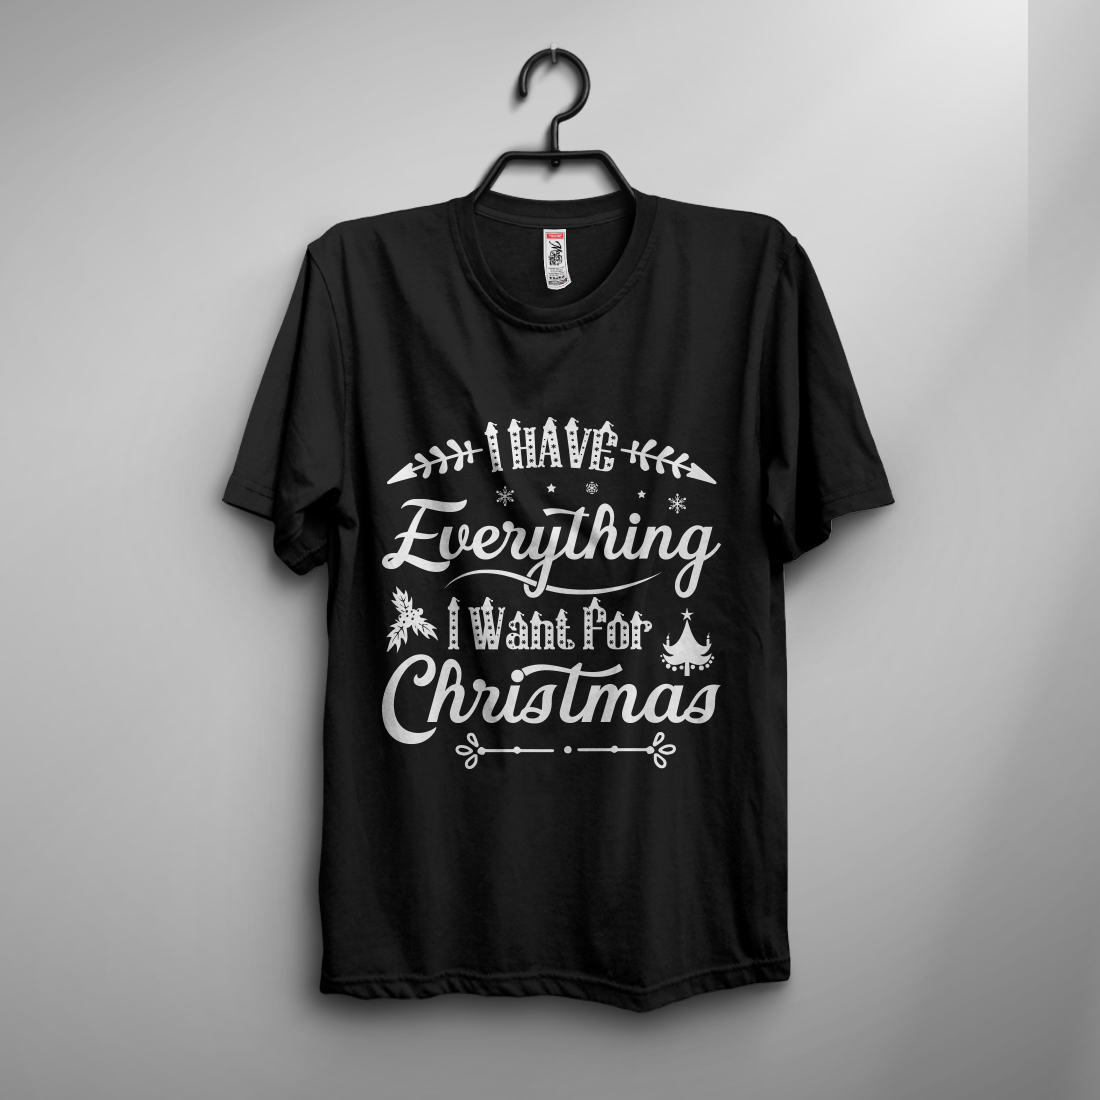 I have everything i want for christmas T-shirt design cover image.